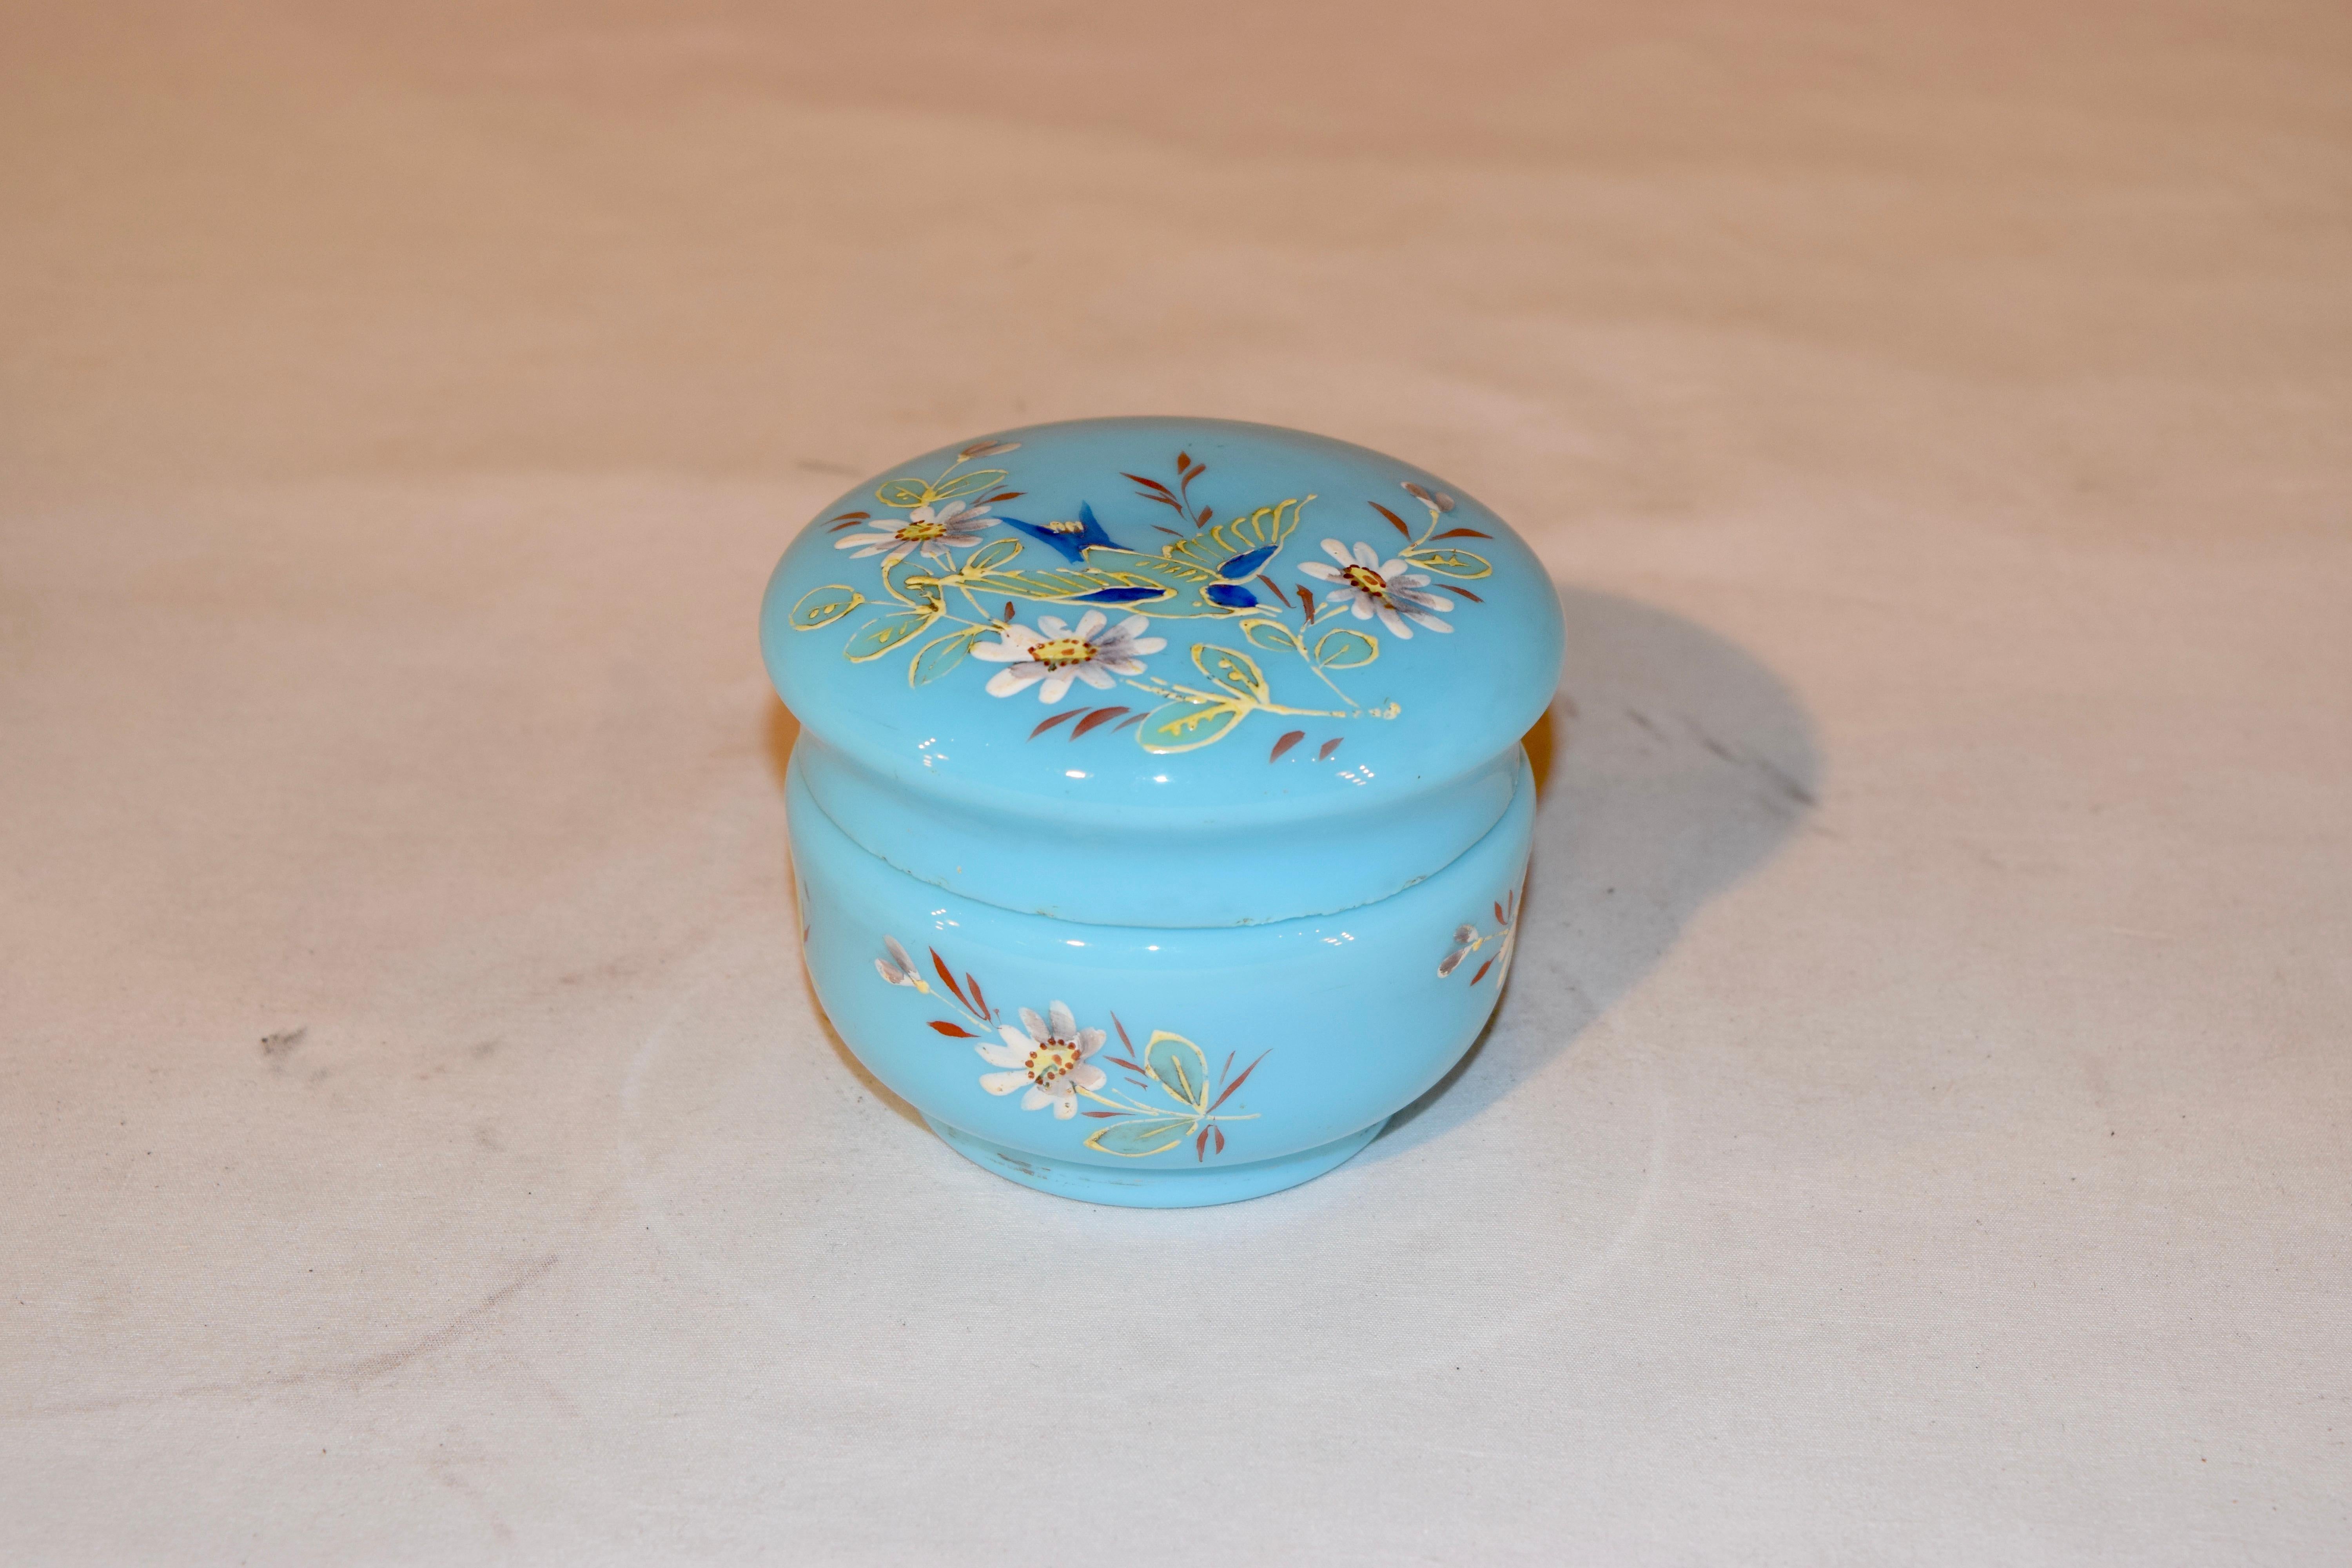 19th century blue opaline glass jar from France with hand painted floral decorations on lid and base.